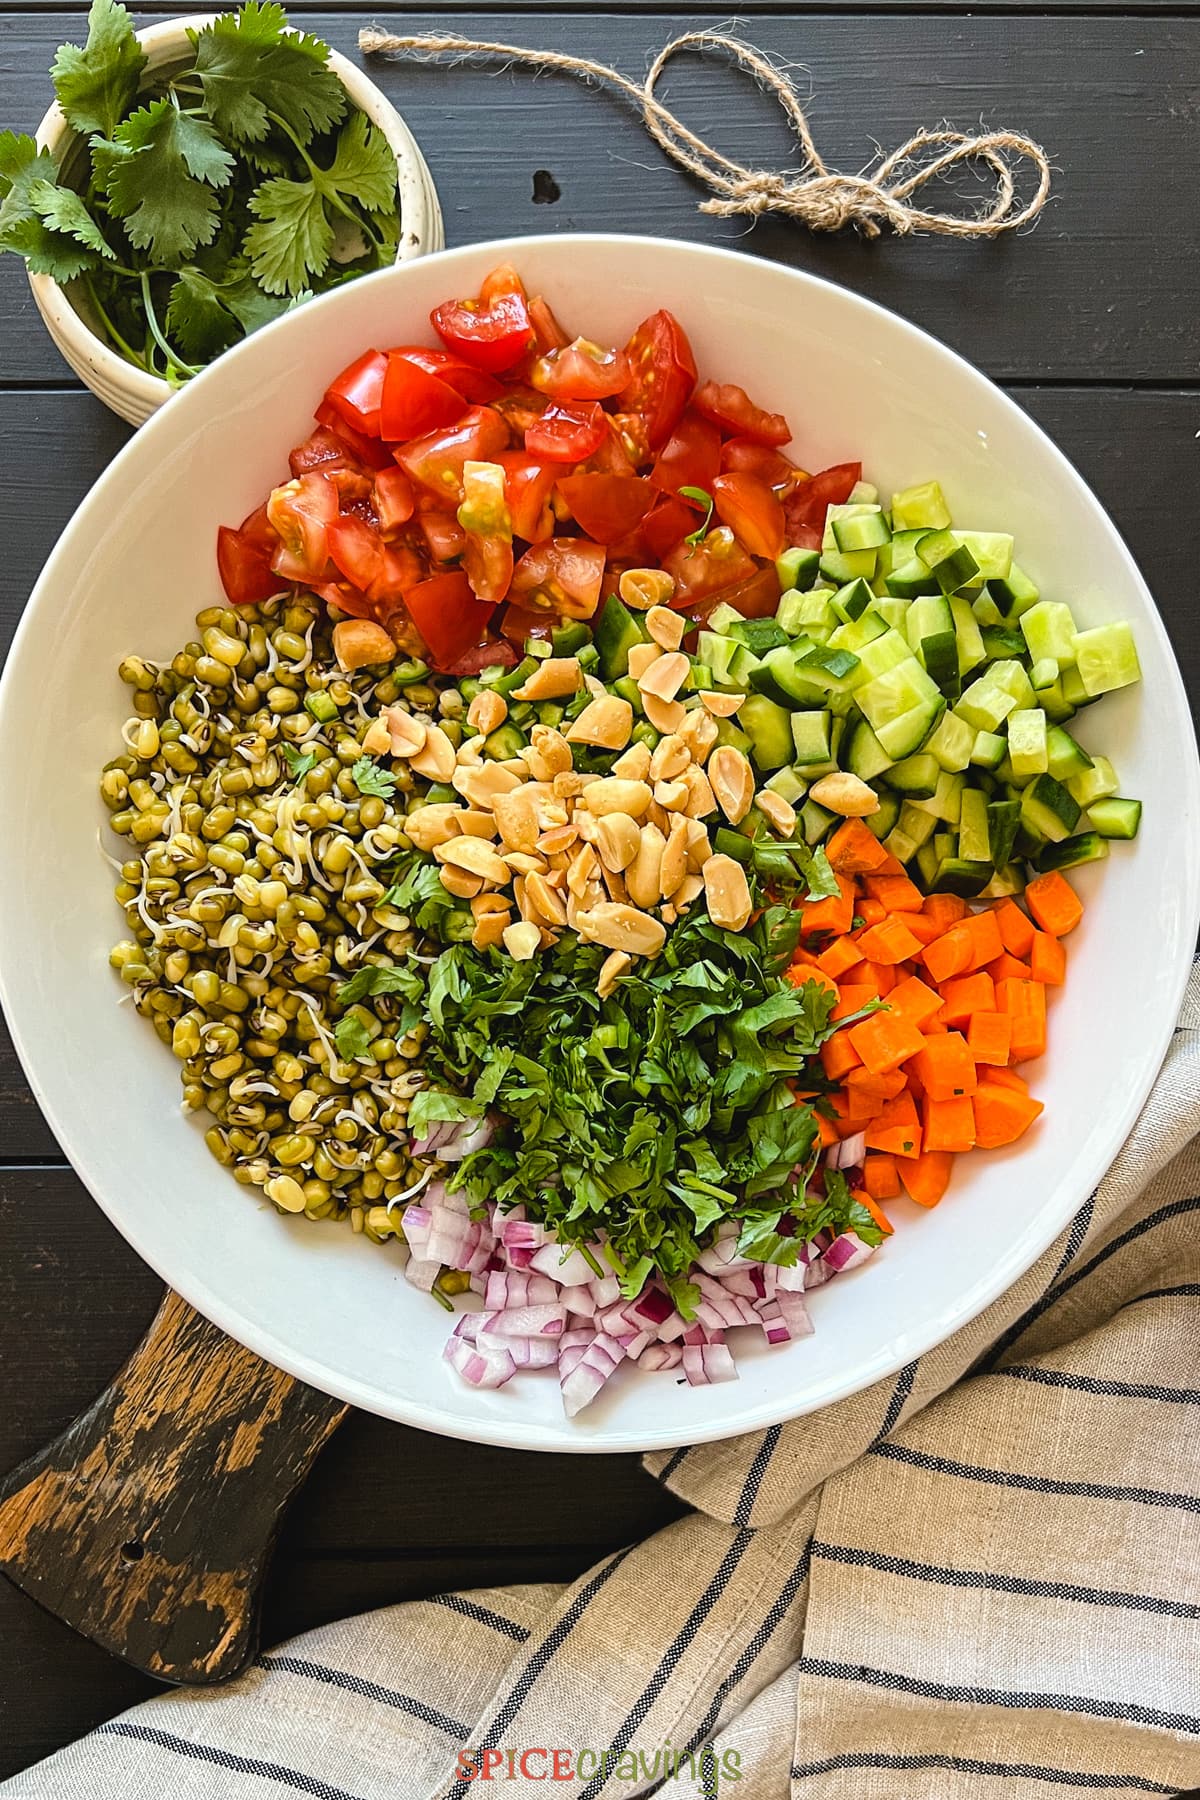 chopped vegetables and sprouted moong beans in large white bowl